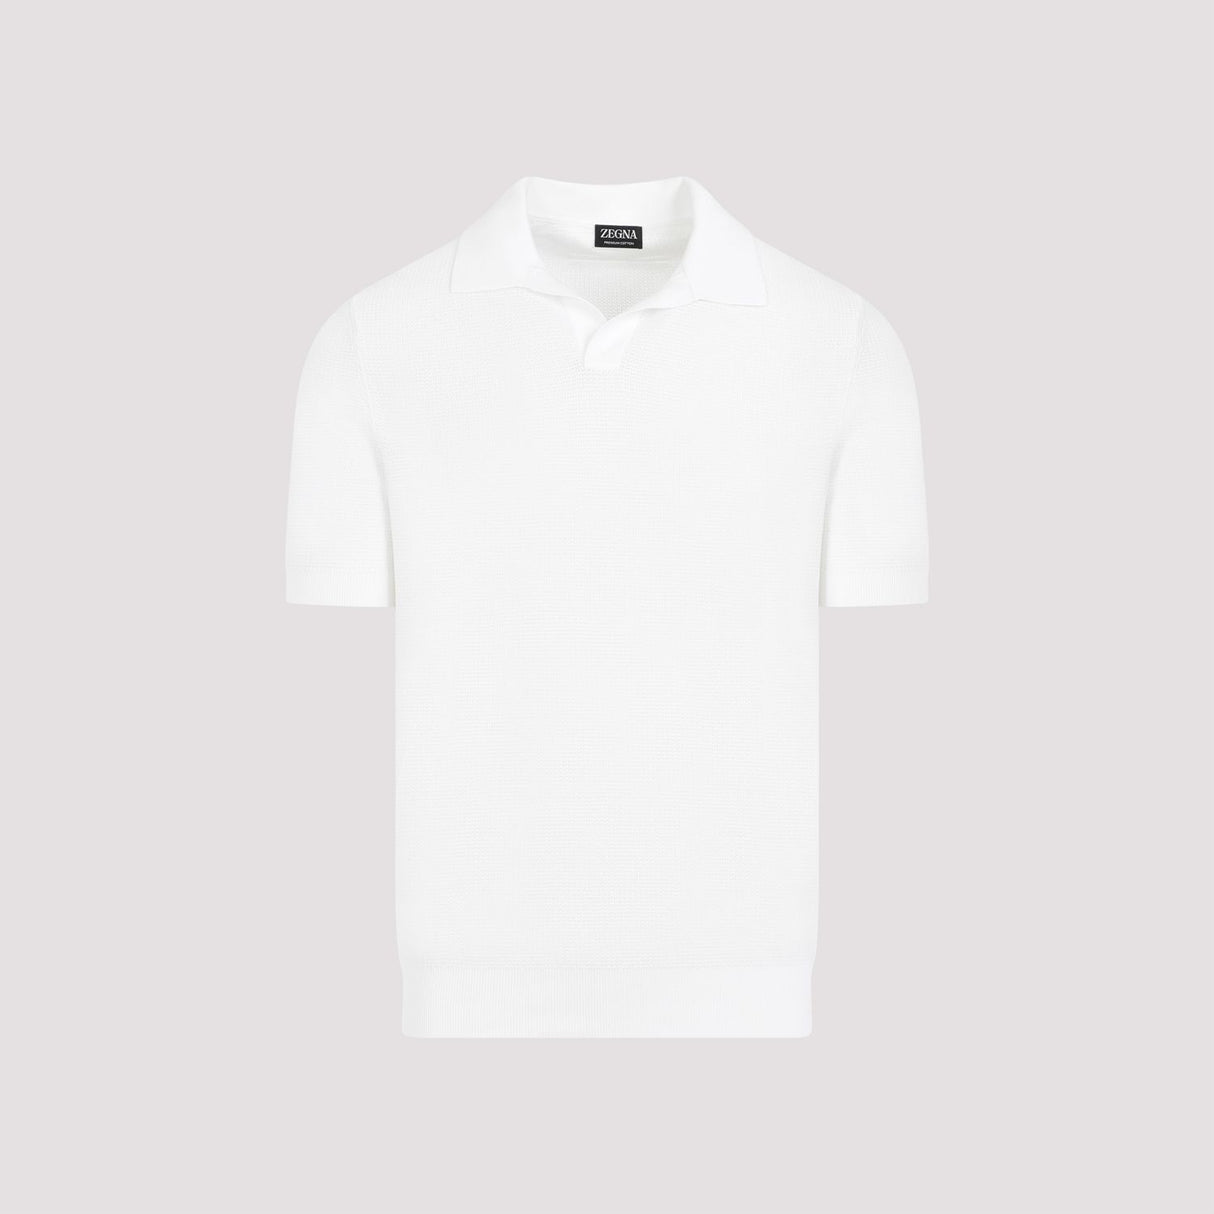 ZEGNA Classic White Cotton Polo for Men - SS24 Collection